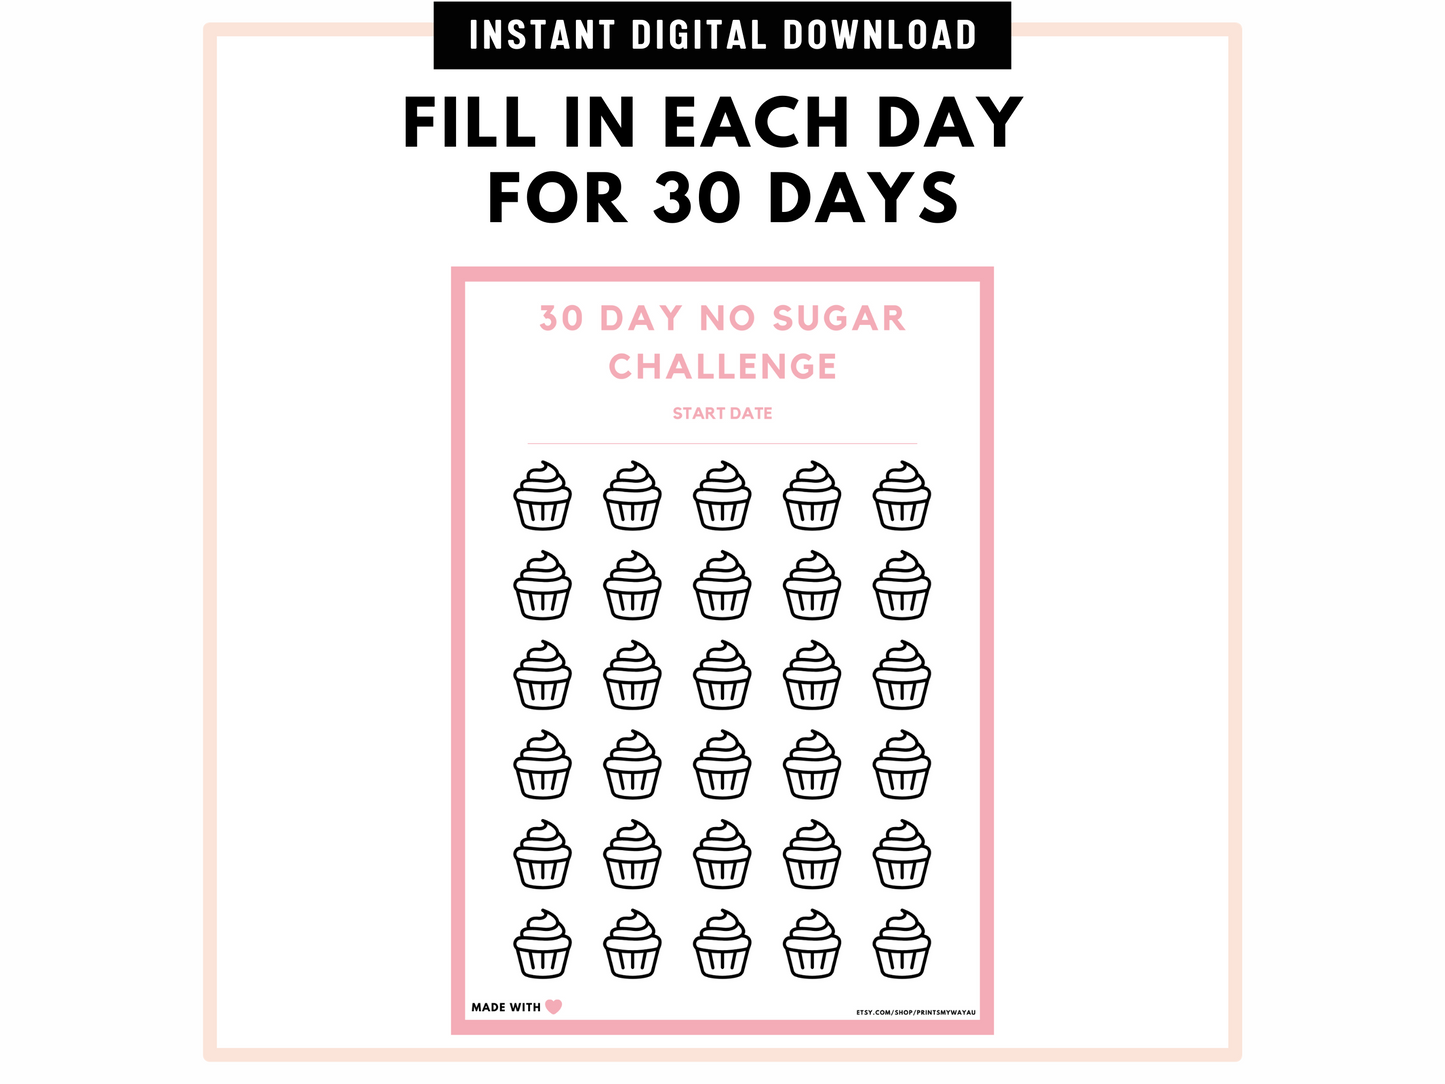 No Sugar Challenge Printable Health Tracker - Health Challenge & Diabetic Friendly Lifestyle with No Sweets